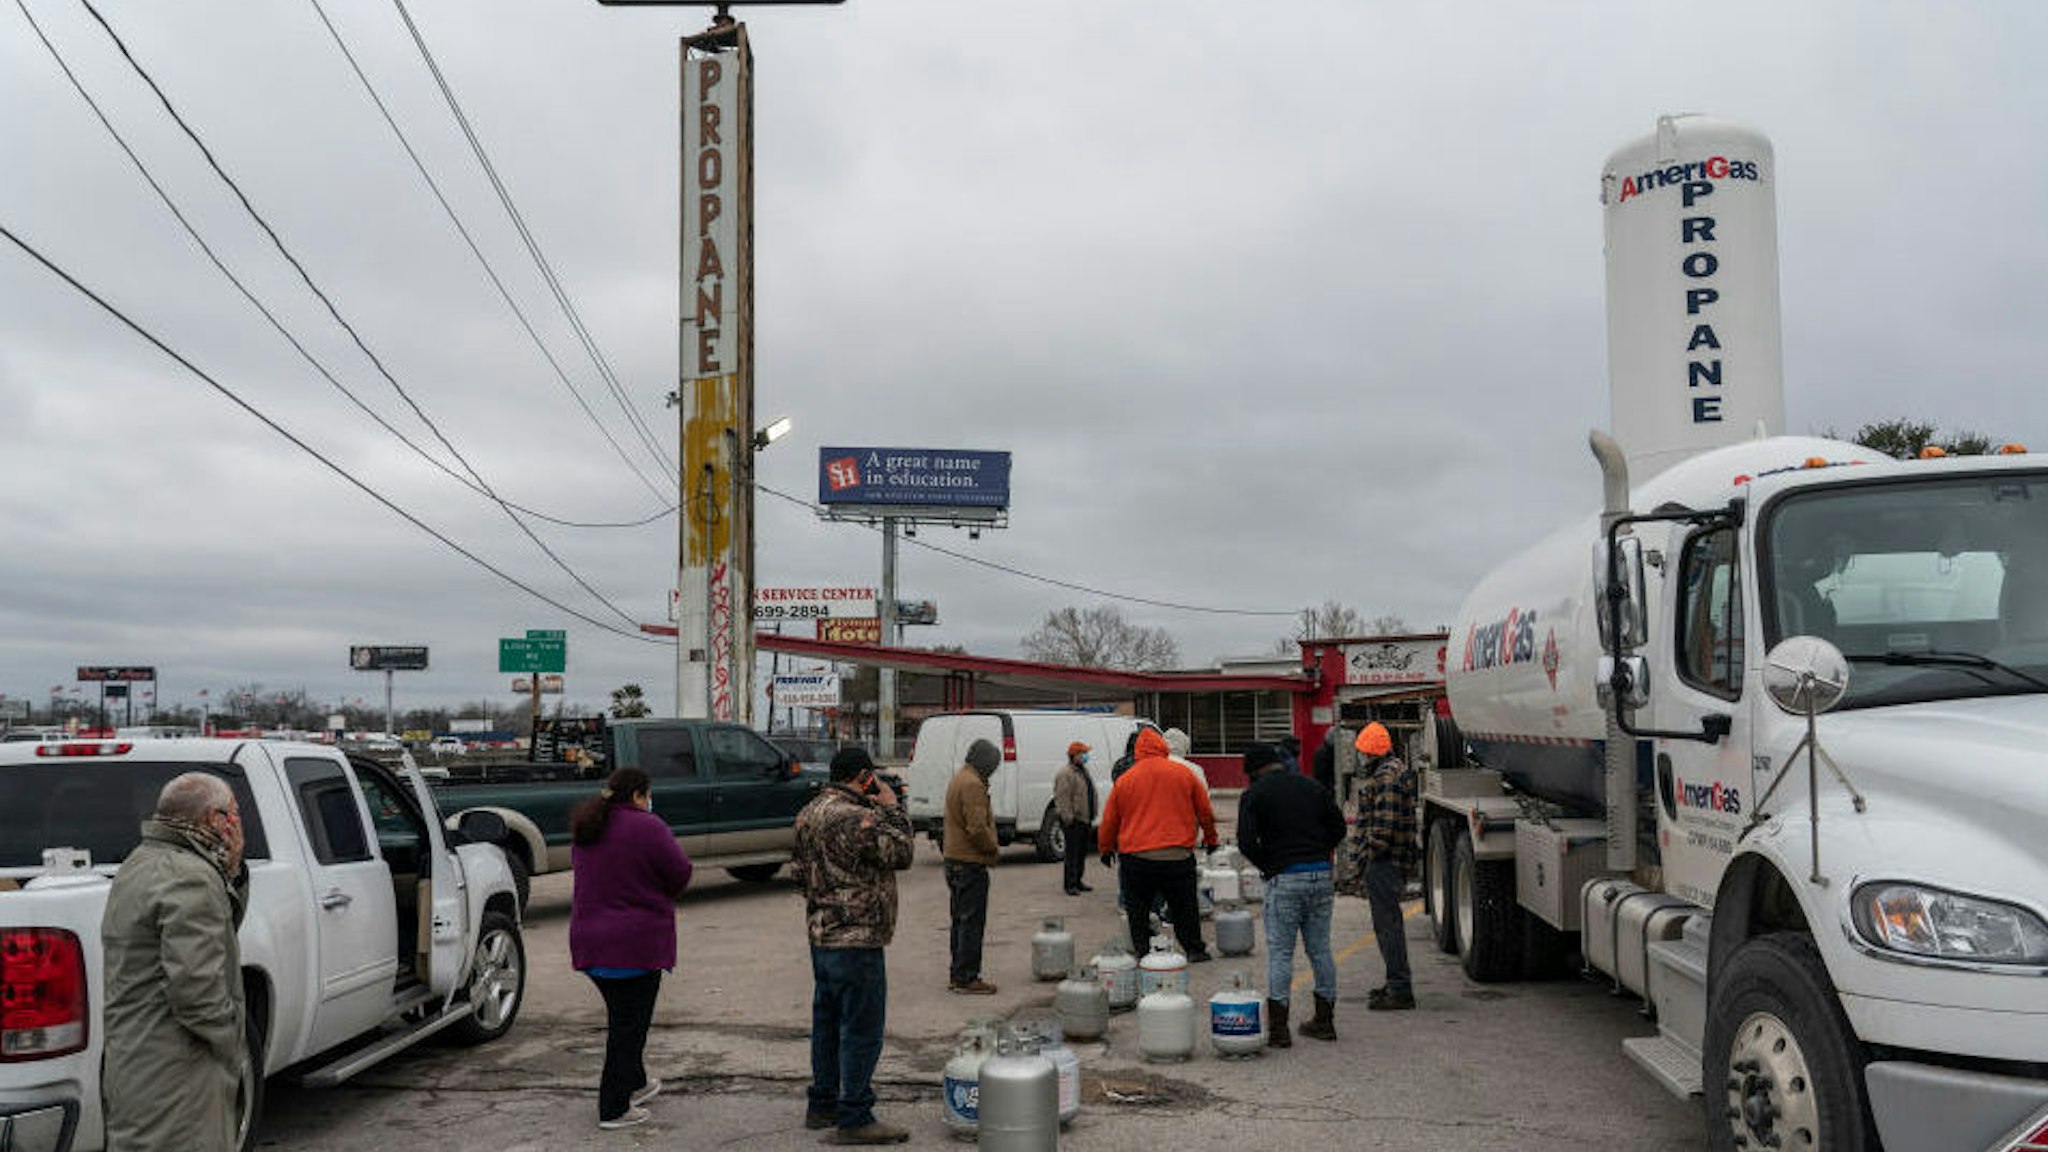 HOUSTON, TX - FEBRUARY 18: People line up at a propane gas station to refill their tanks after winter weather caused electricity blackouts on February 18, 2021 in Houston, Texas. Winter storm Uri brought severe temperature drops causing a catastrophic failure of the power grid in Texas. About two million people are without electricity throughout Houston.